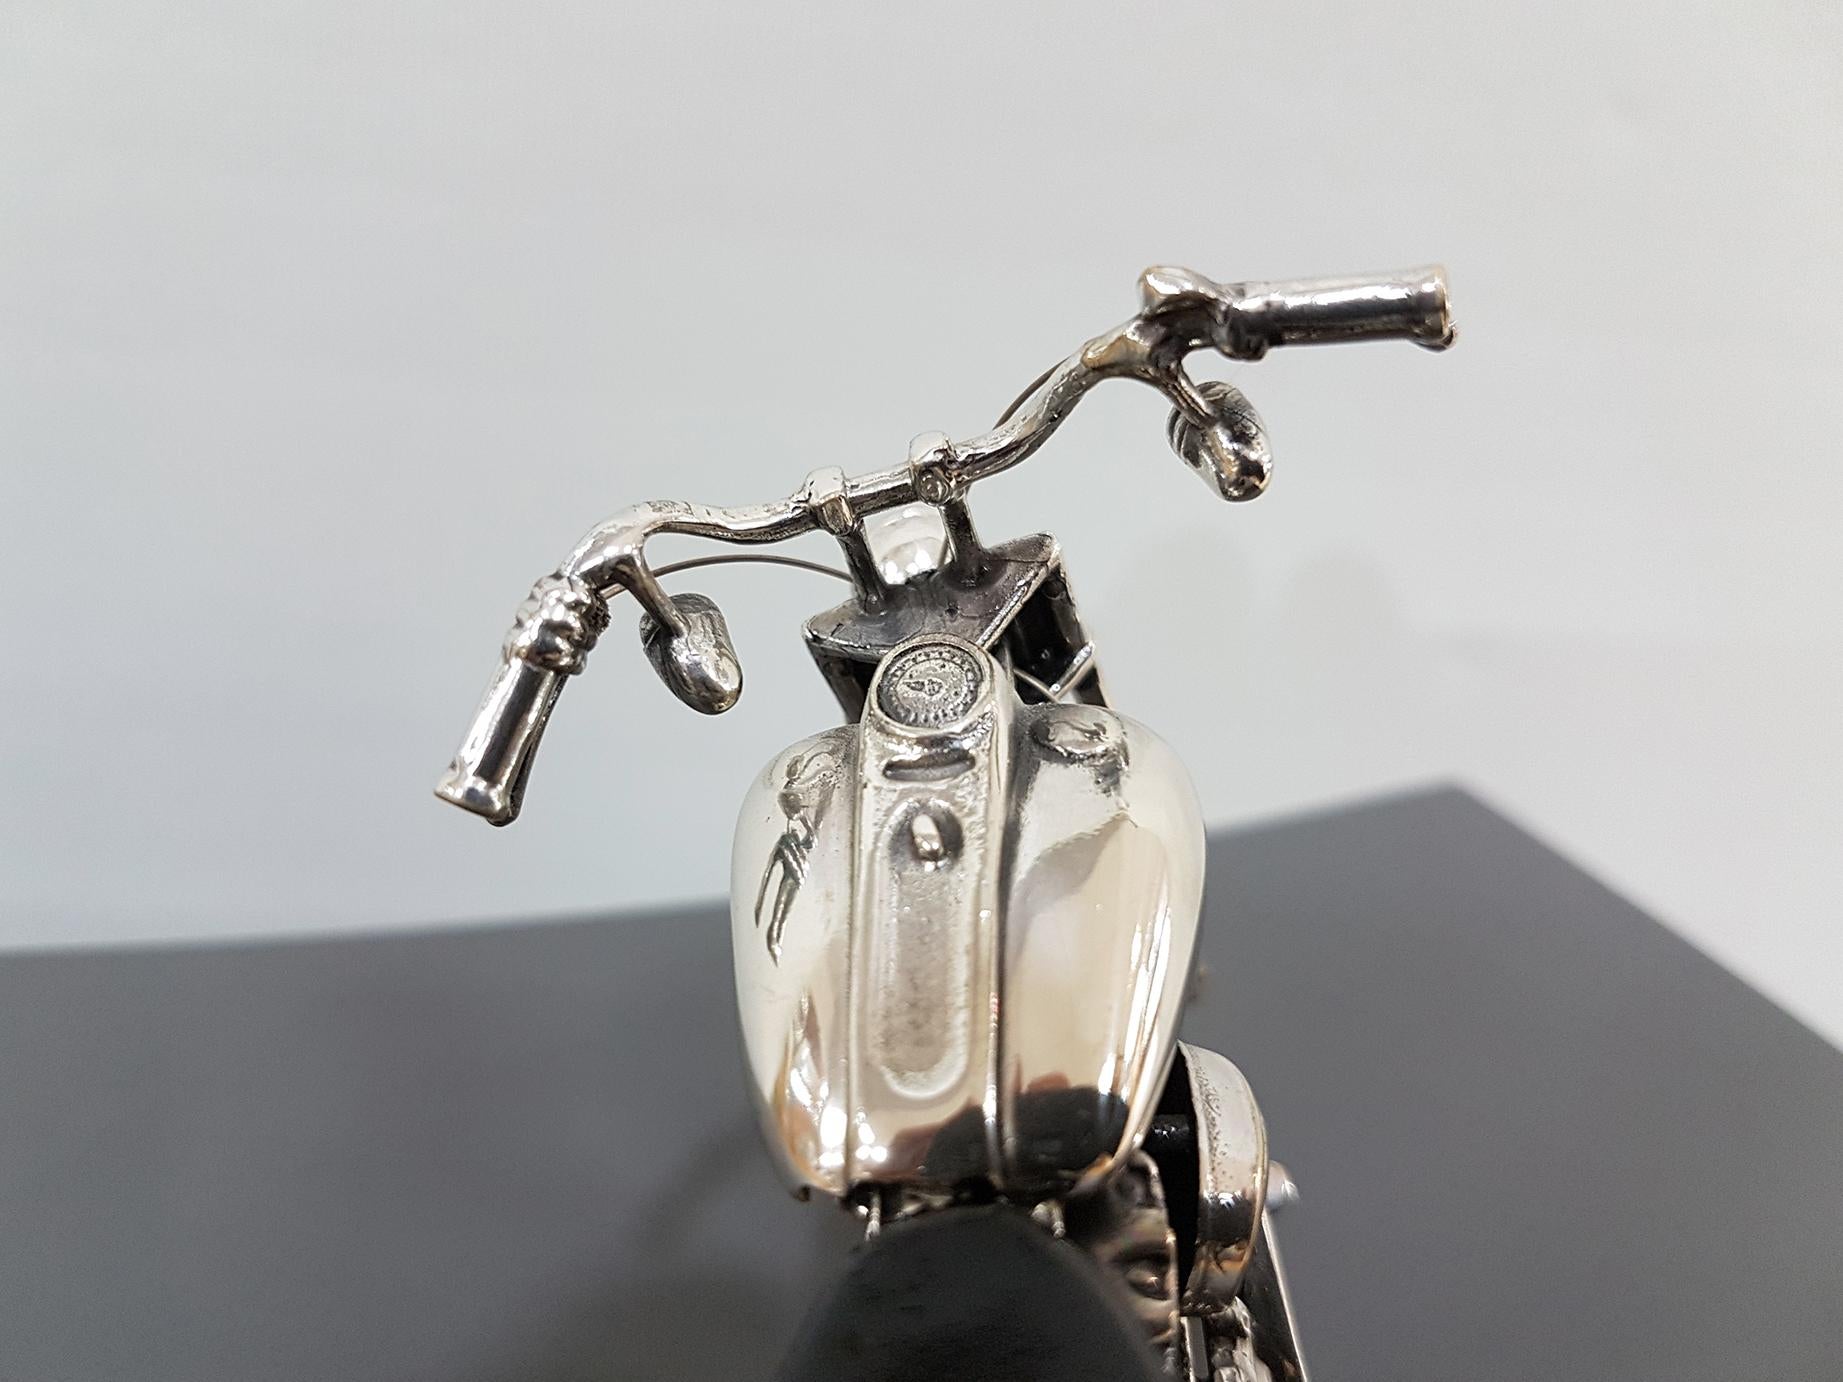 Other 20th Century Sterling Silver Miniature Motorcycle Harley Davidson, Made in Italy For Sale